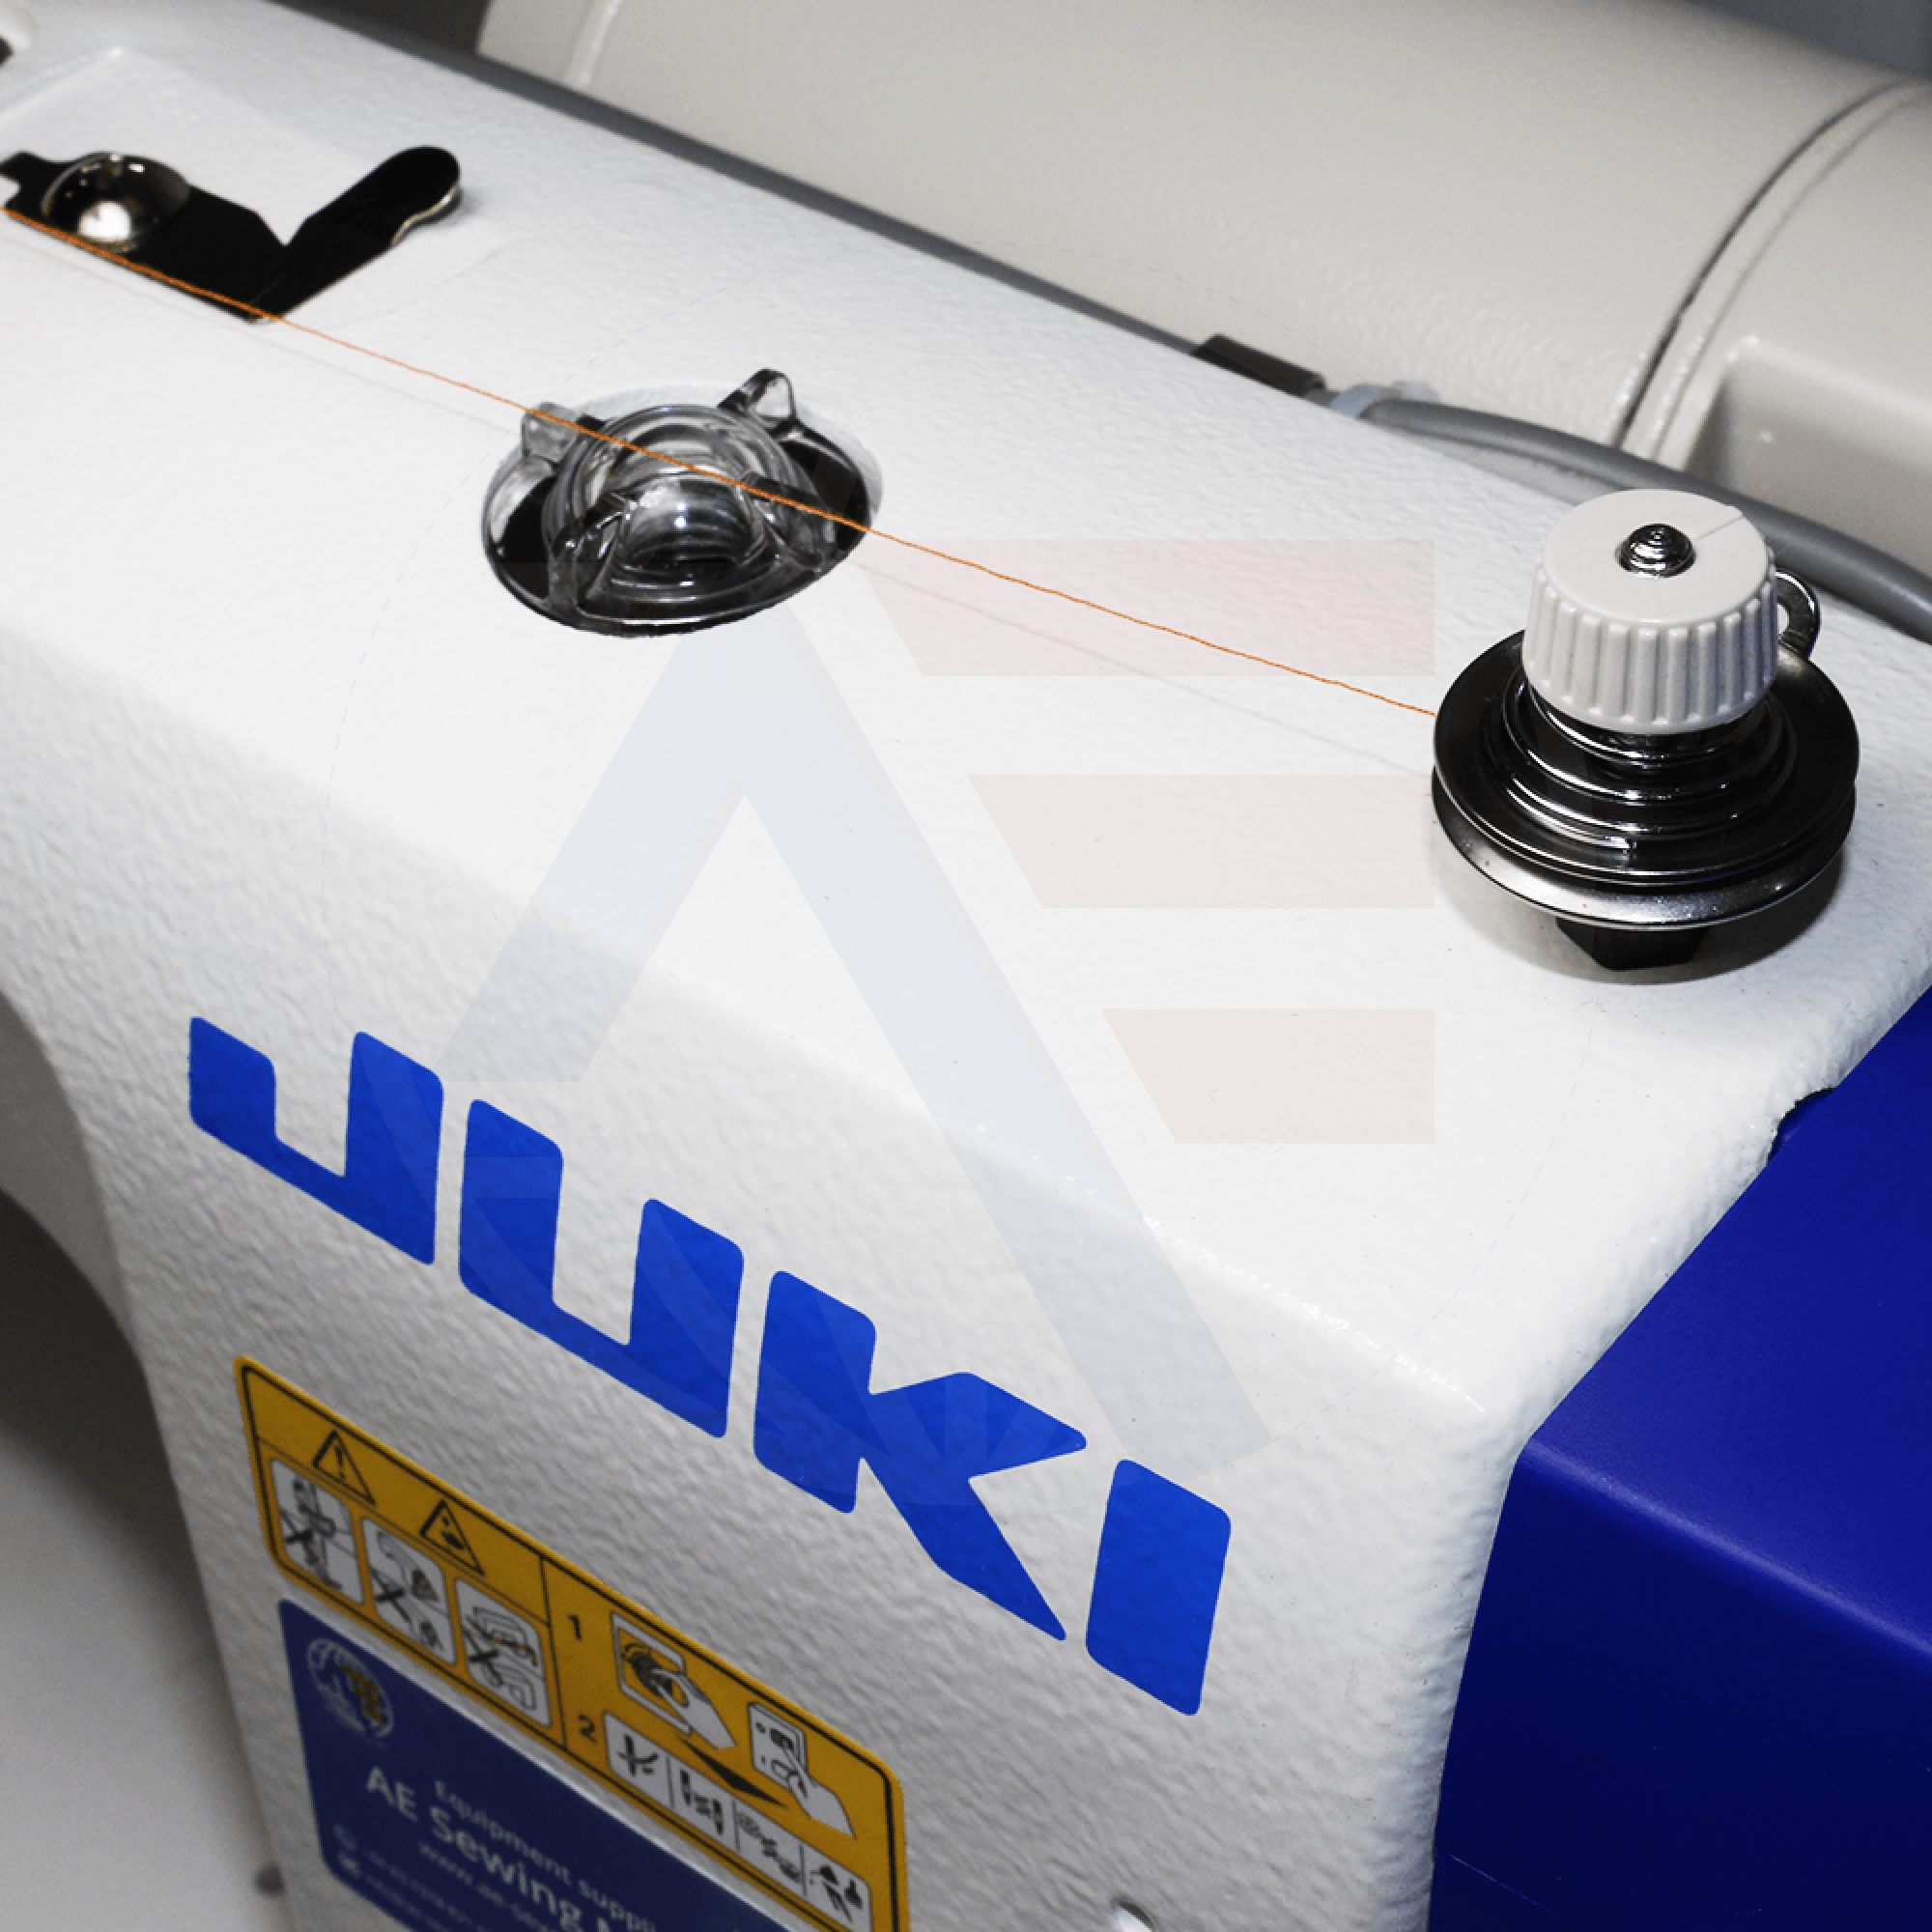 Juki Ddl-7000A-7 1-Needle Lockstitch Machine With Automatic Functions Sewing Machines